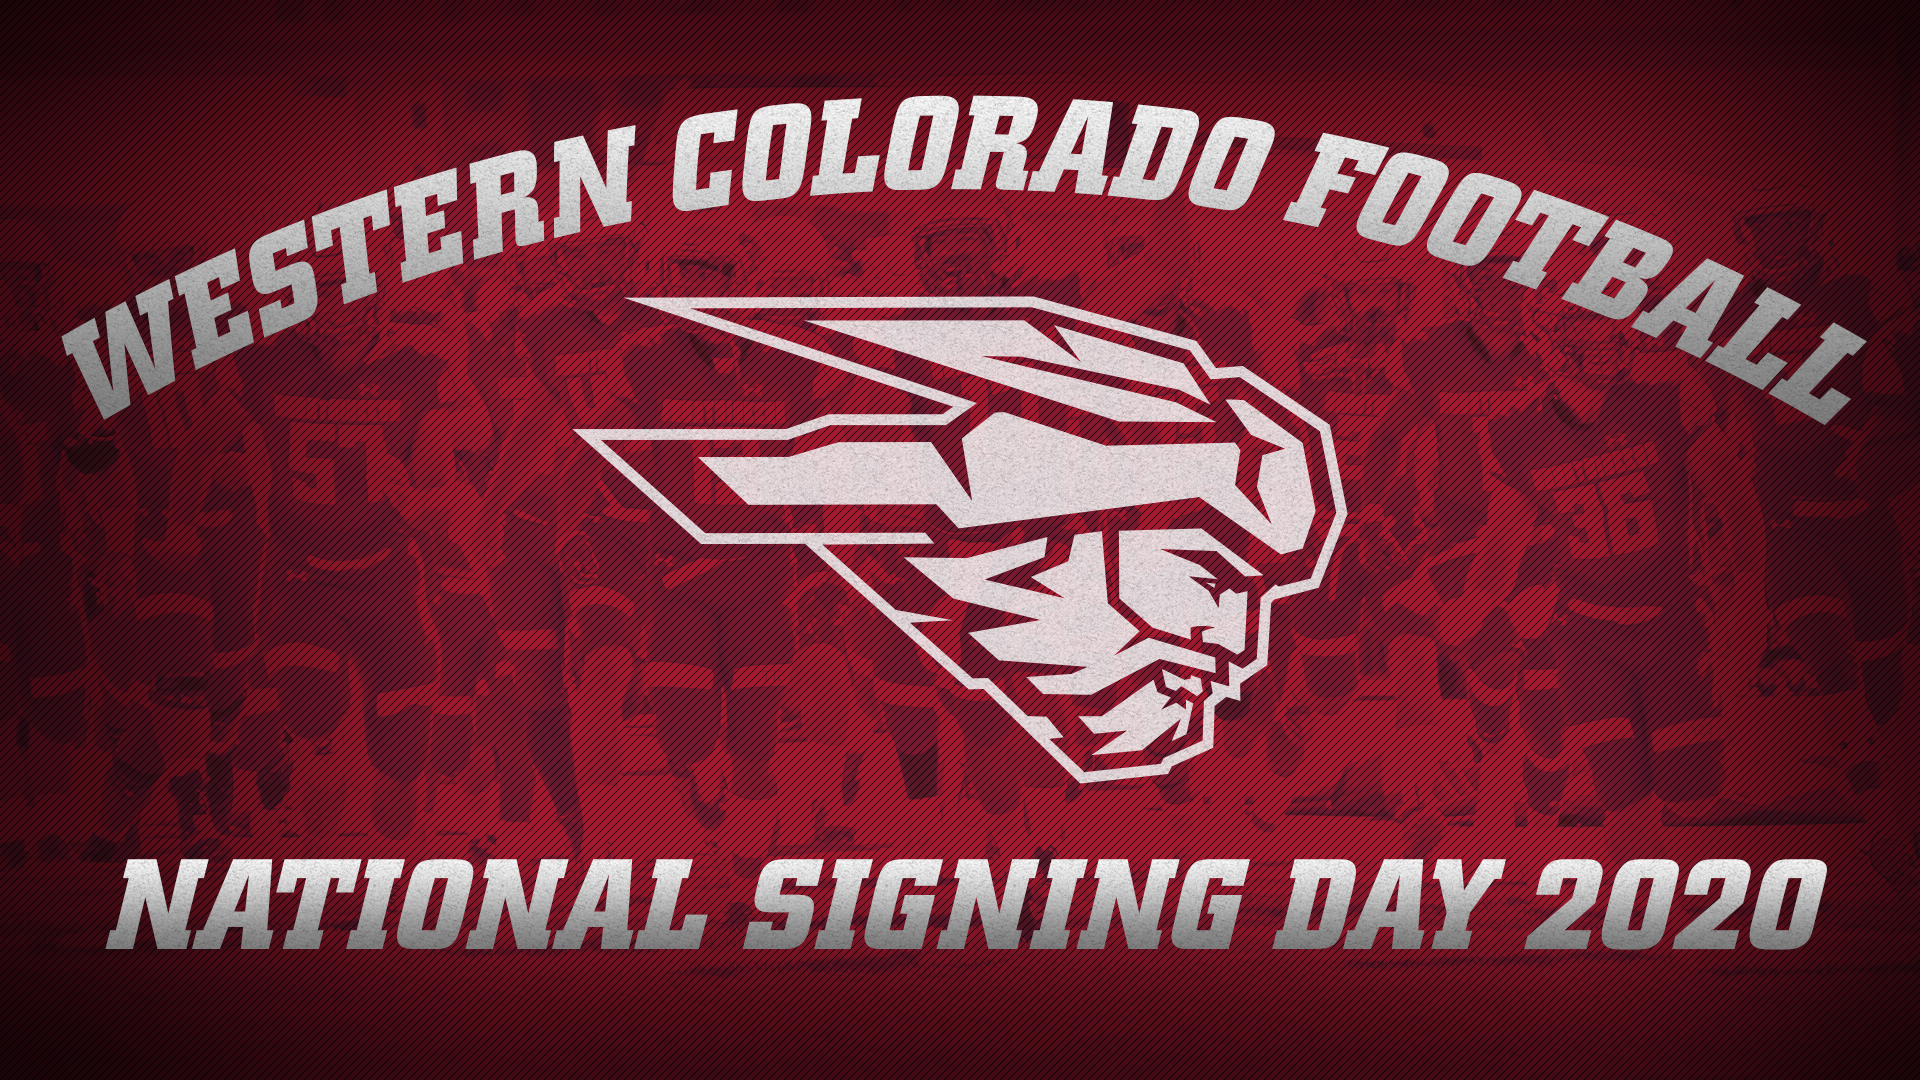 Mountaineer Football National Signing Day Western Colorado